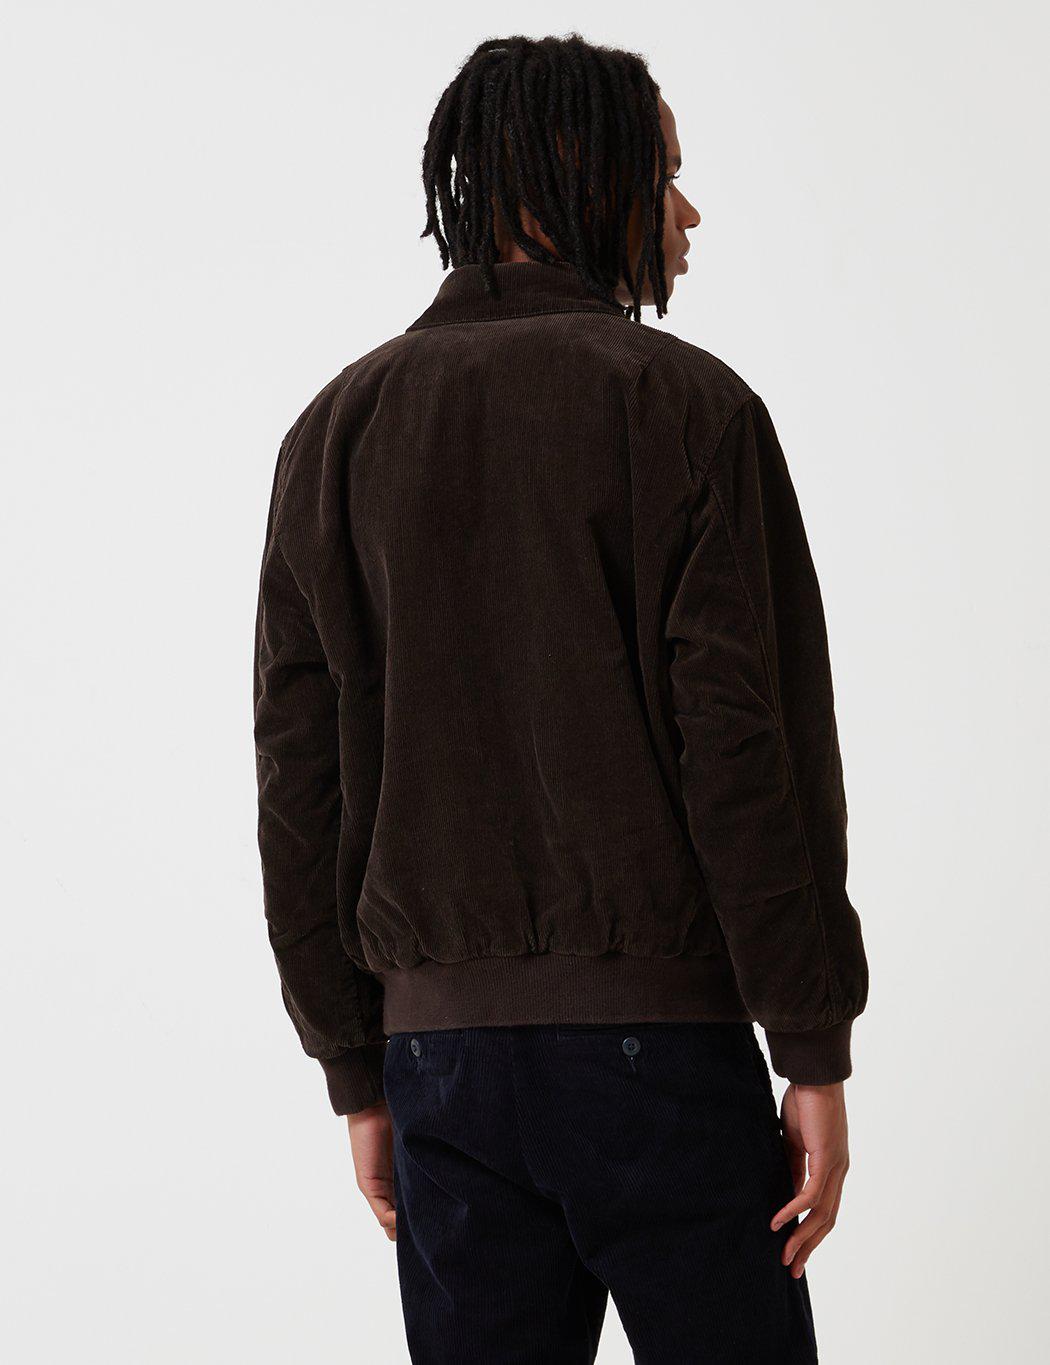 Carhartt Cotton Manchester Jacket in Brown for Men - Lyst